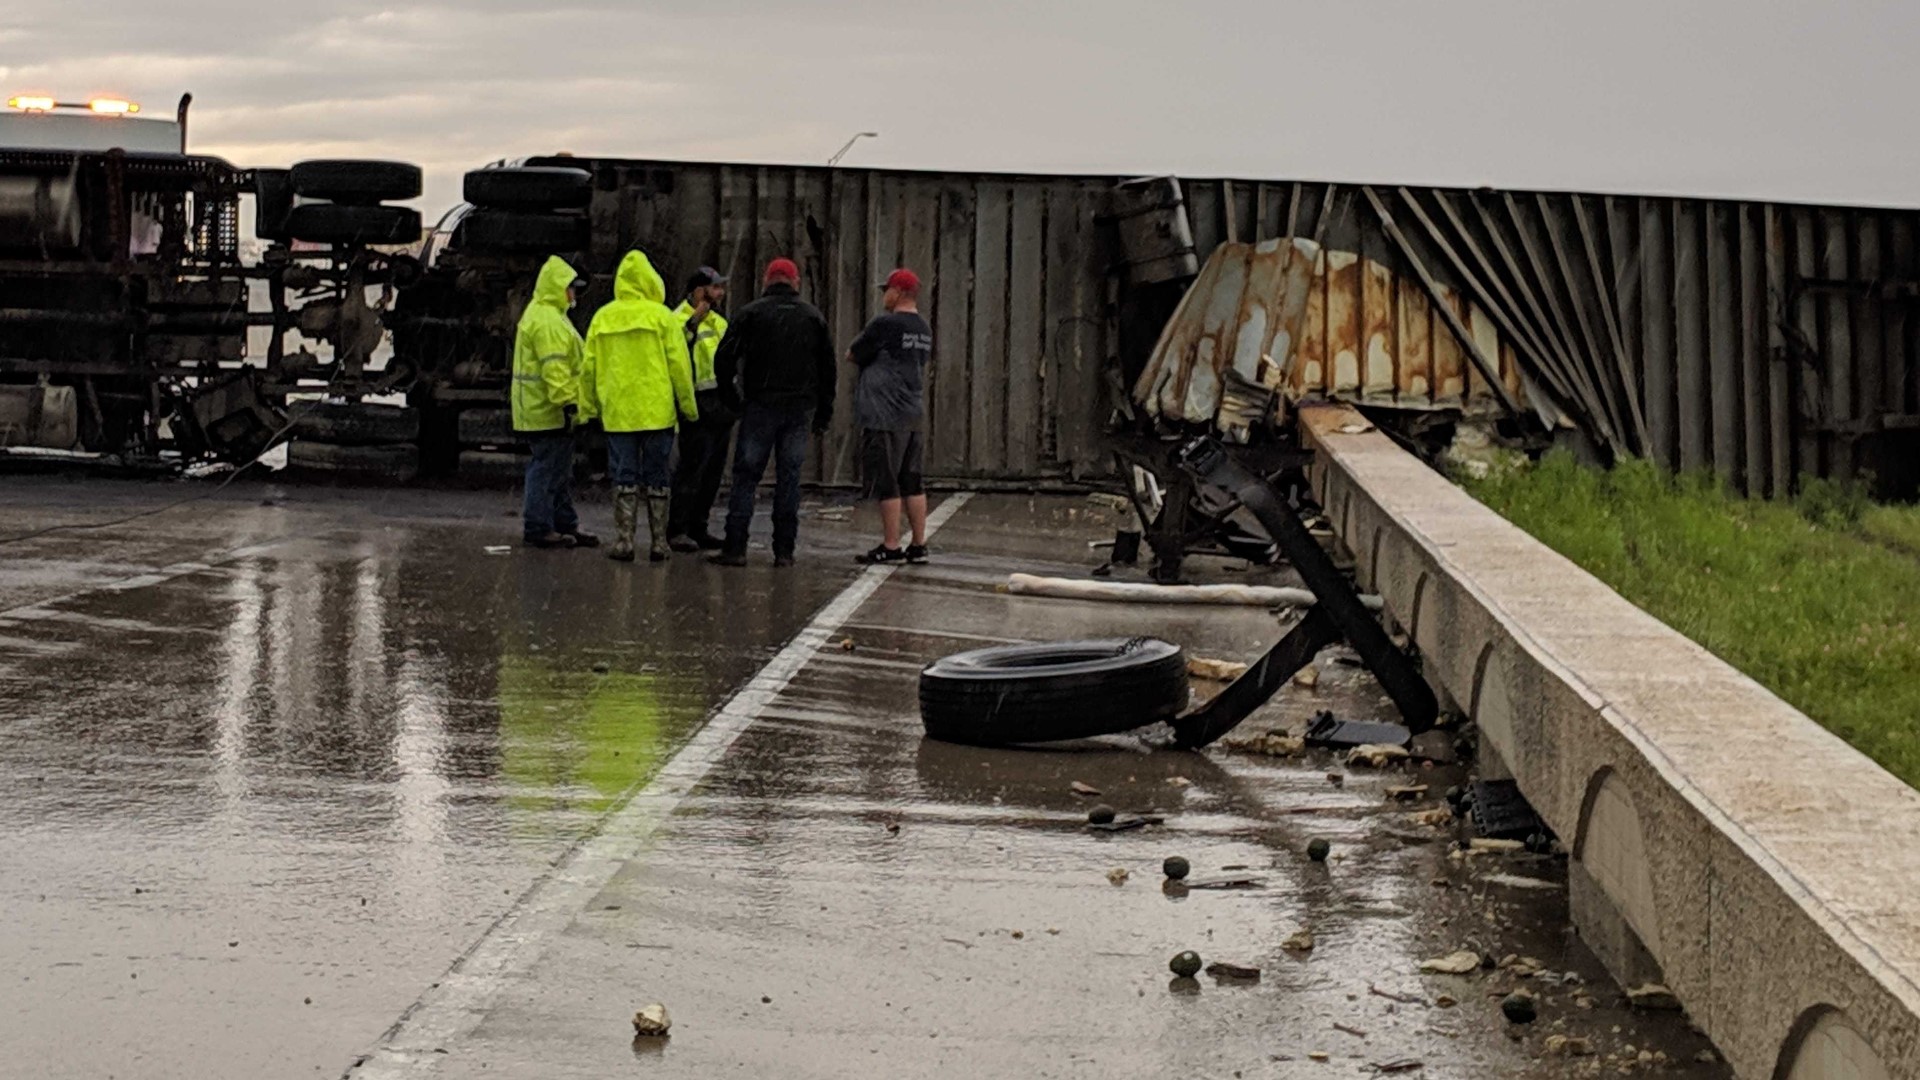 All northbound I-35 lanes in Salado were closed Wednesday after a semi carrying avocados and another truck collided.